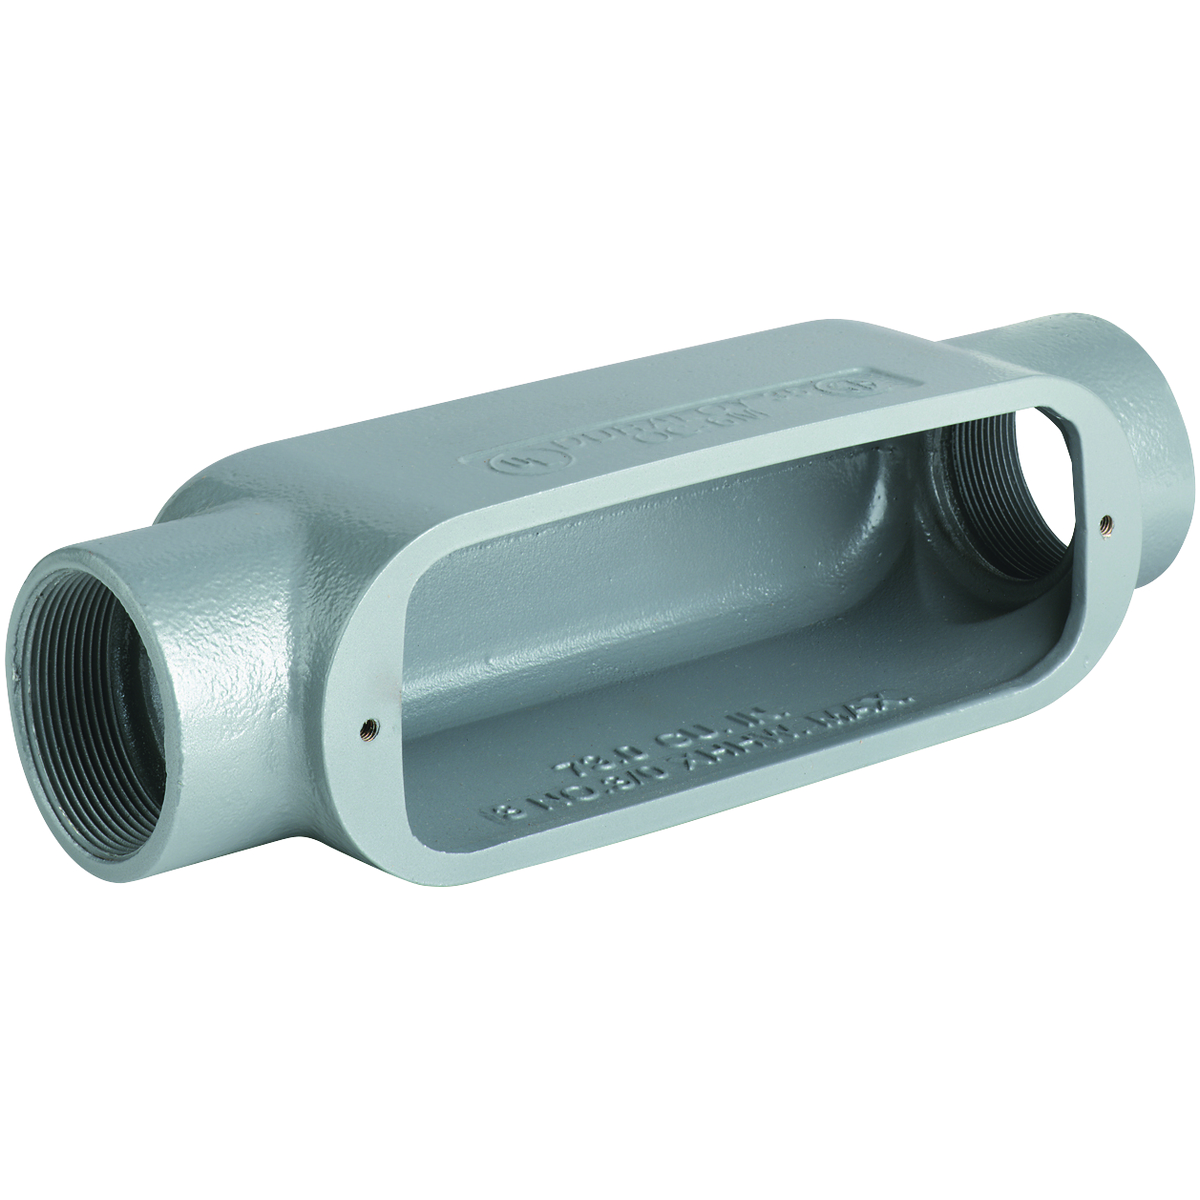 O SERIES/DURALOY 5 SERIES - ALUMINUM CONDUIT BODY - C TYPE - HUB SIZE 1INCH - VOLUME 12.0 CUBIC INCHES